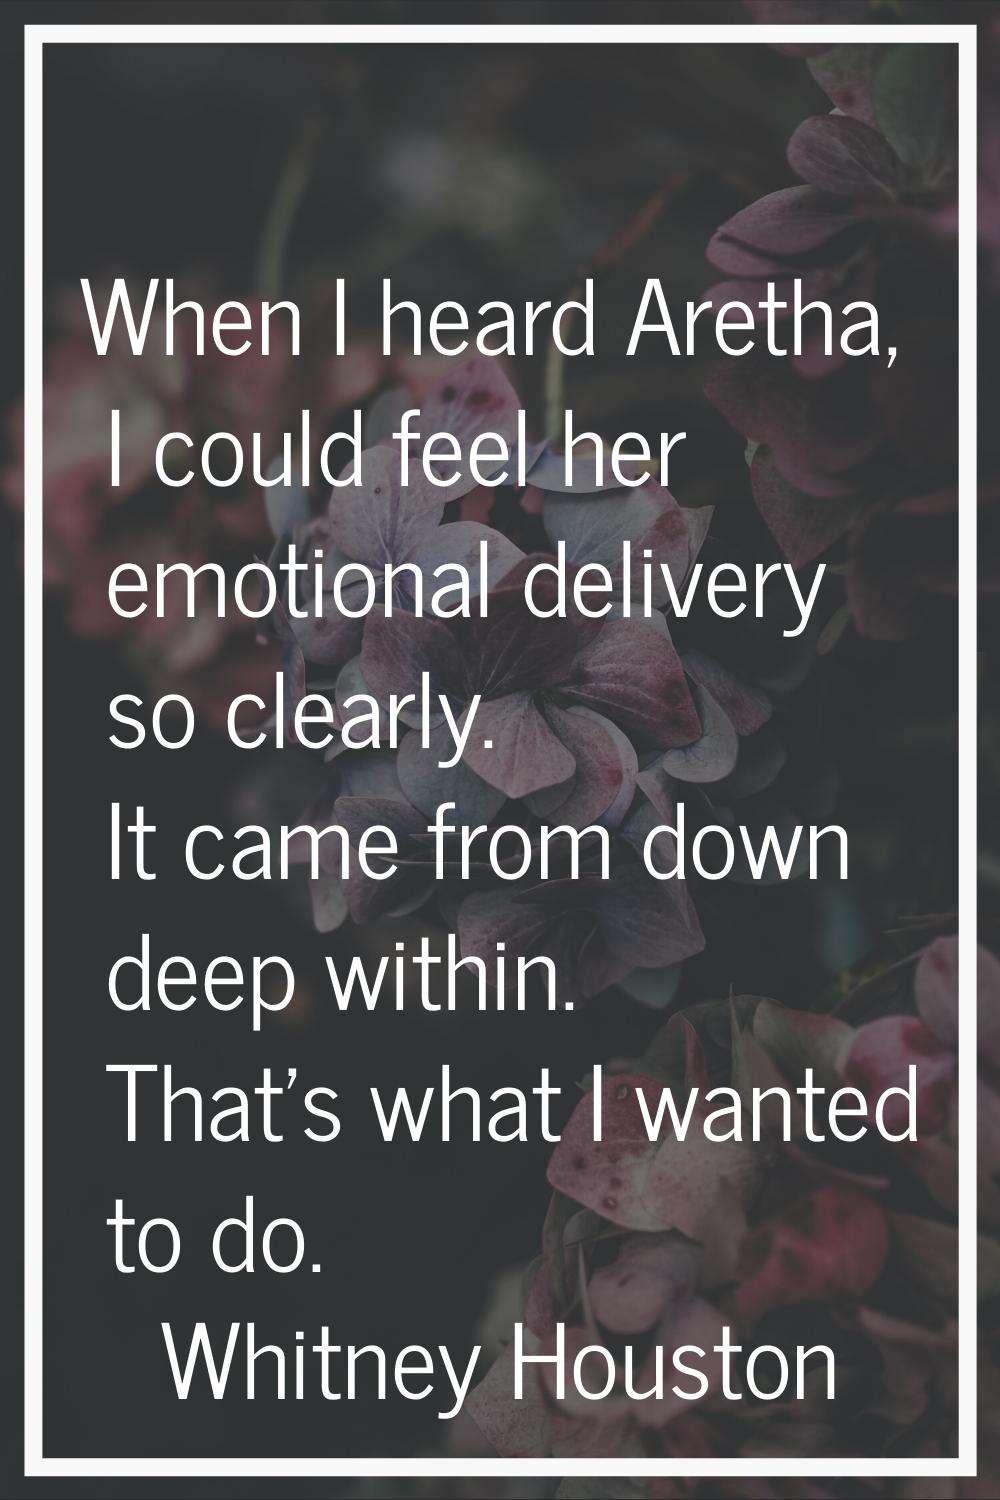 When I heard Aretha, I could feel her emotional delivery so clearly. It came from down deep within.